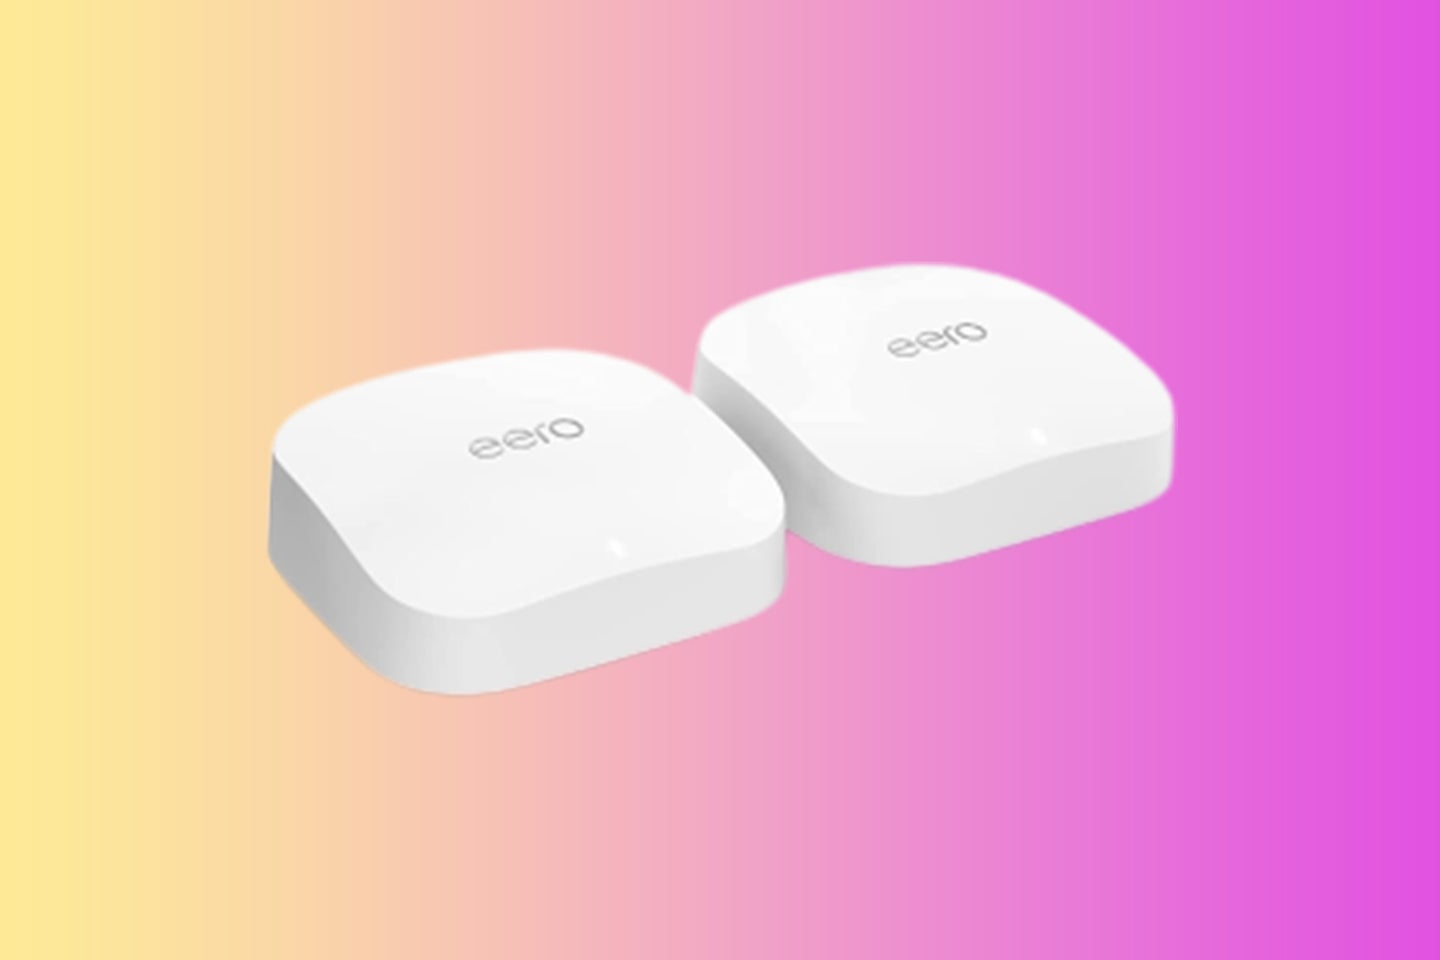 An eero mesh router on a gradient background